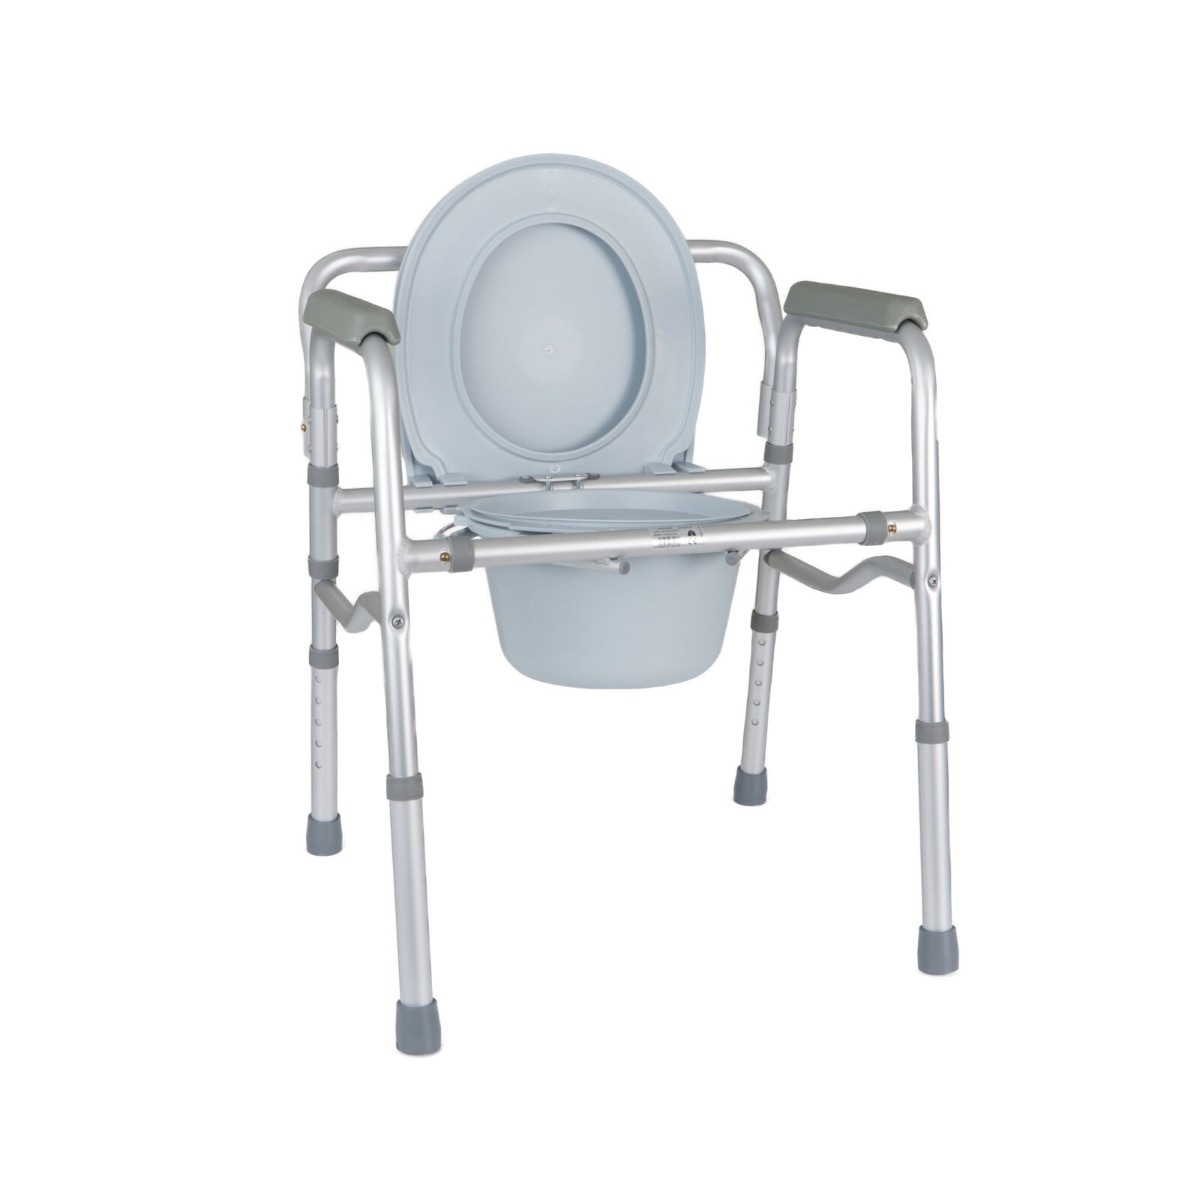 Homecraft Folding Commode and Toilet Surround